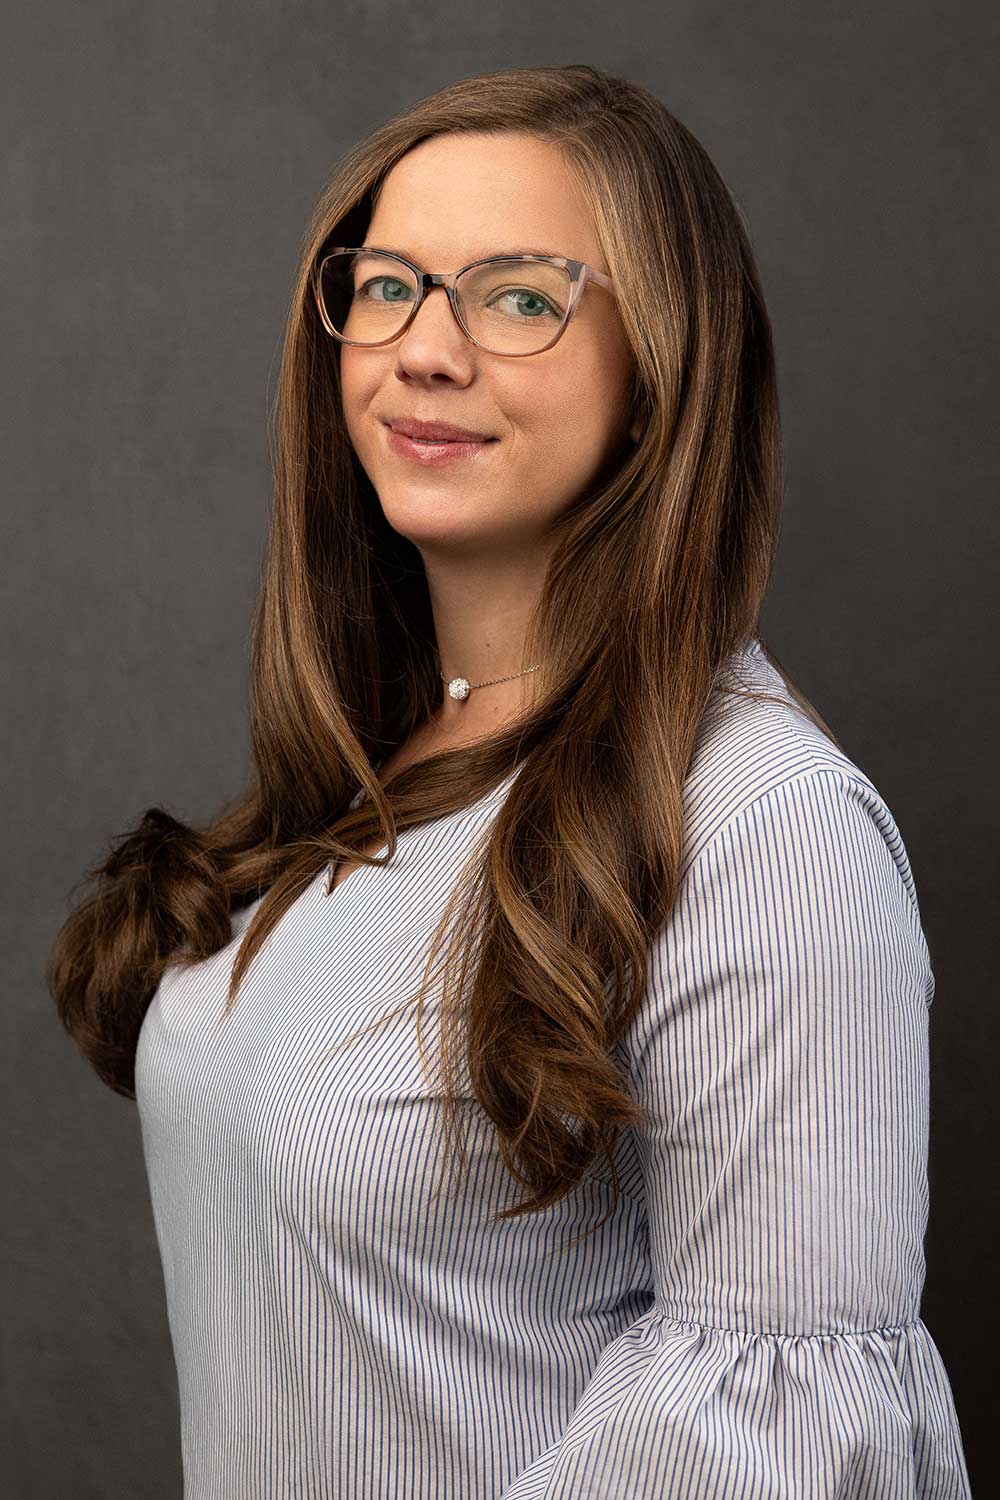 Professional woman with glasses posing for a portrait against a gray background.